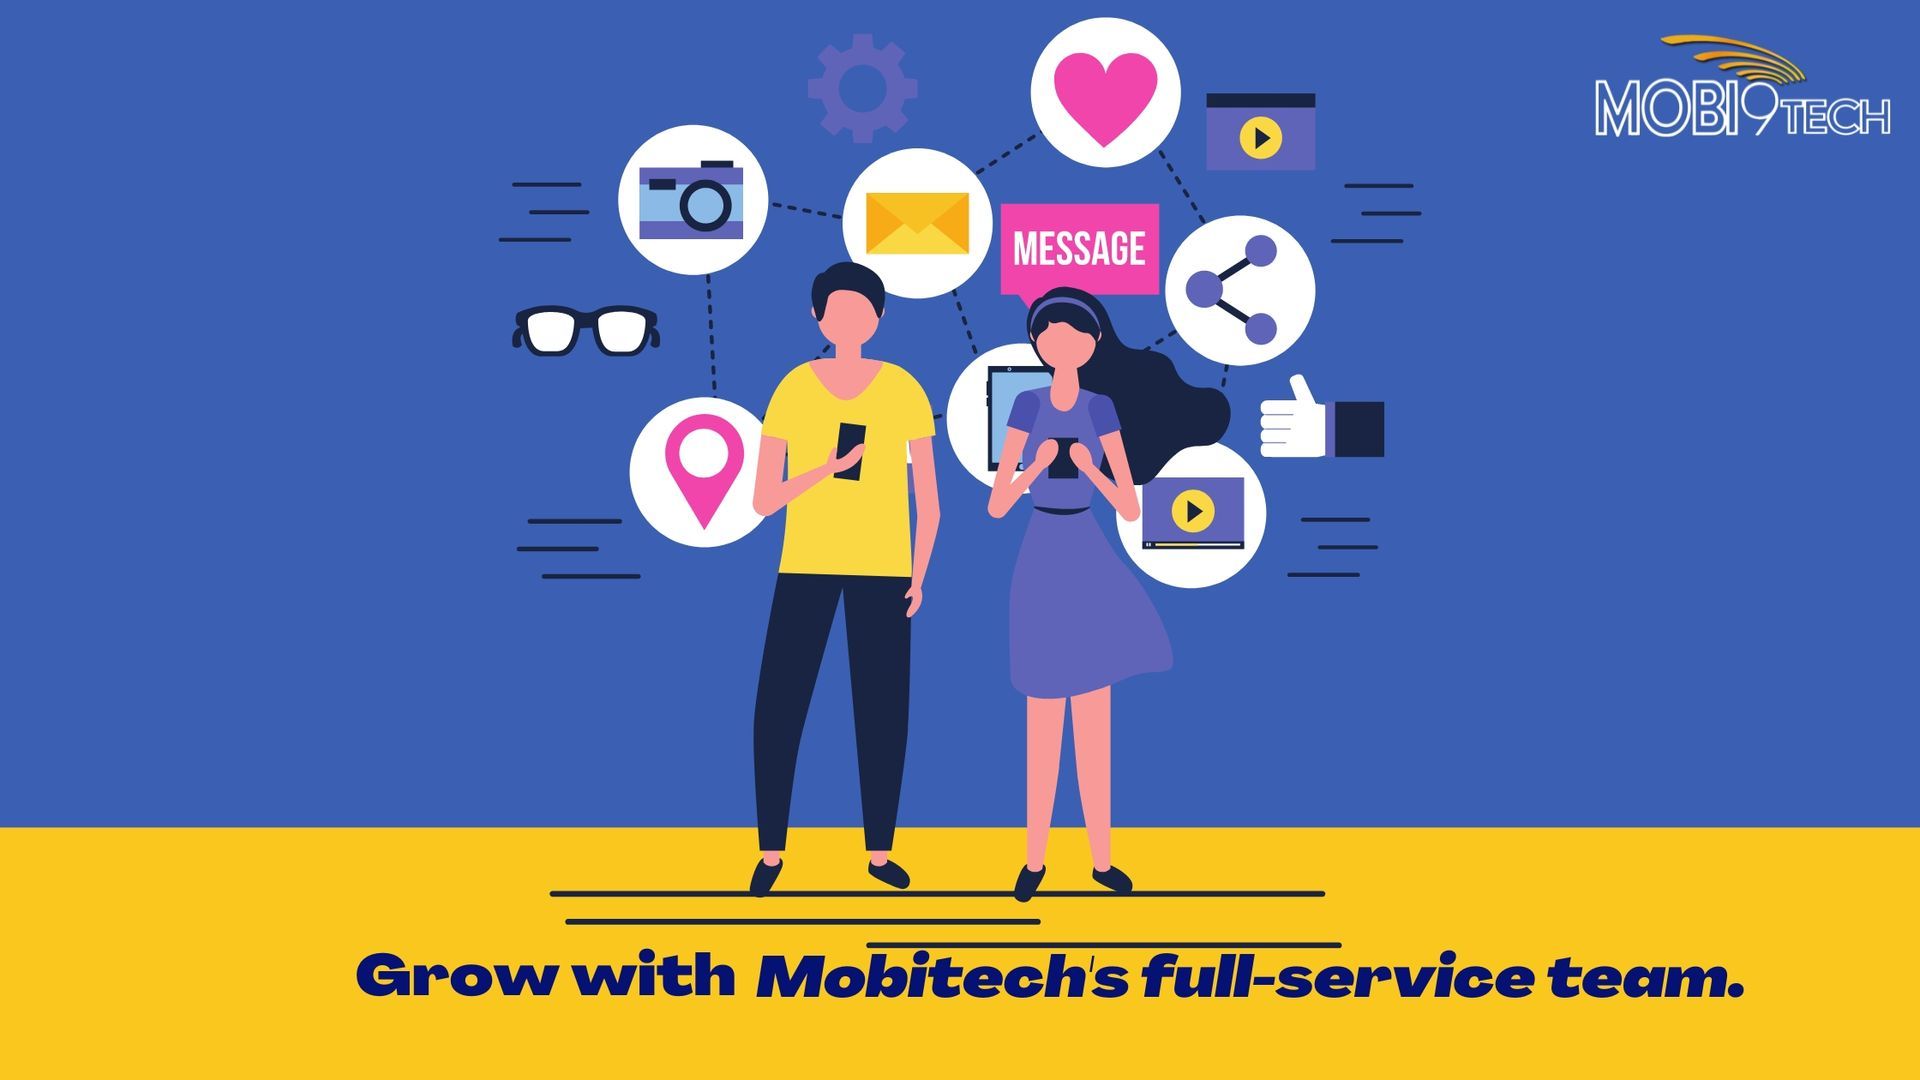 Expand your business with Mobitech's full-service team.